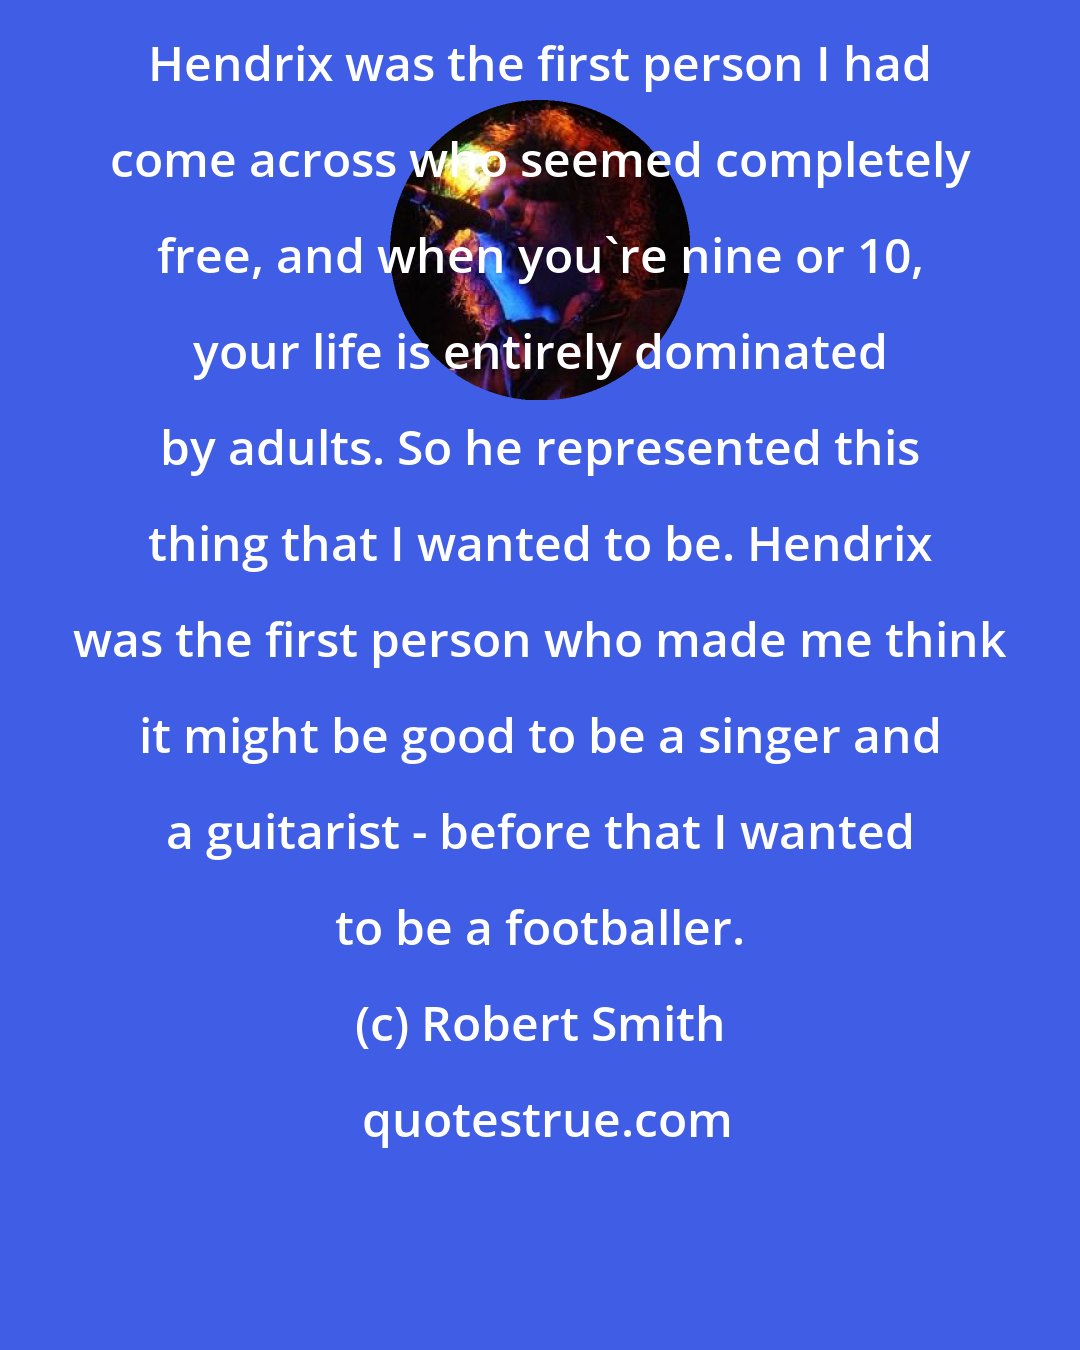 Robert Smith: Hendrix was the first person I had come across who seemed completely free, and when you're nine or 10, your life is entirely dominated by adults. So he represented this thing that I wanted to be. Hendrix was the first person who made me think it might be good to be a singer and a guitarist - before that I wanted to be a footballer.